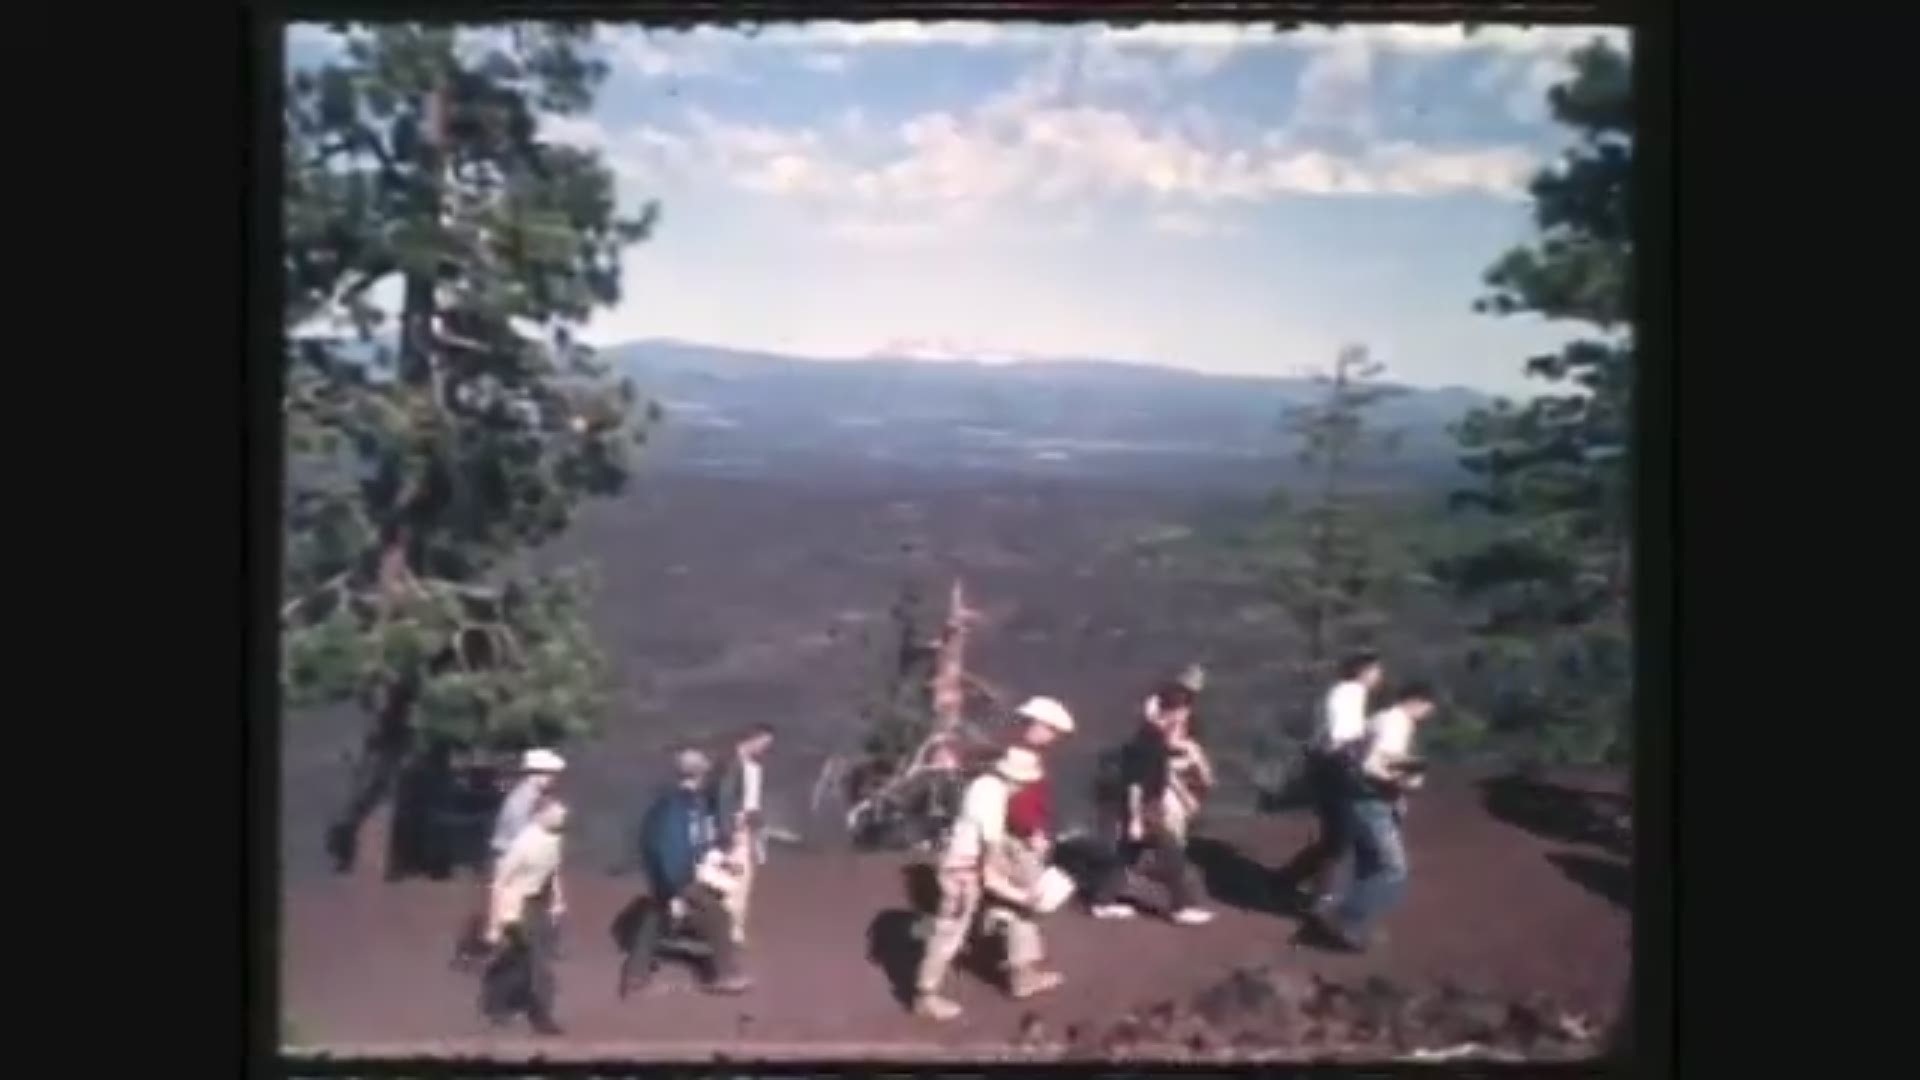 The lava beds of central Oregon were thought to emulate conditions on the surface of the moon. Before the first Apollo flight, astronauts visited the Newberry Crater area. This starts without audio, but you will hear a guide, then former KGW reporter Ivan Smith signing off from Newberry Crater.